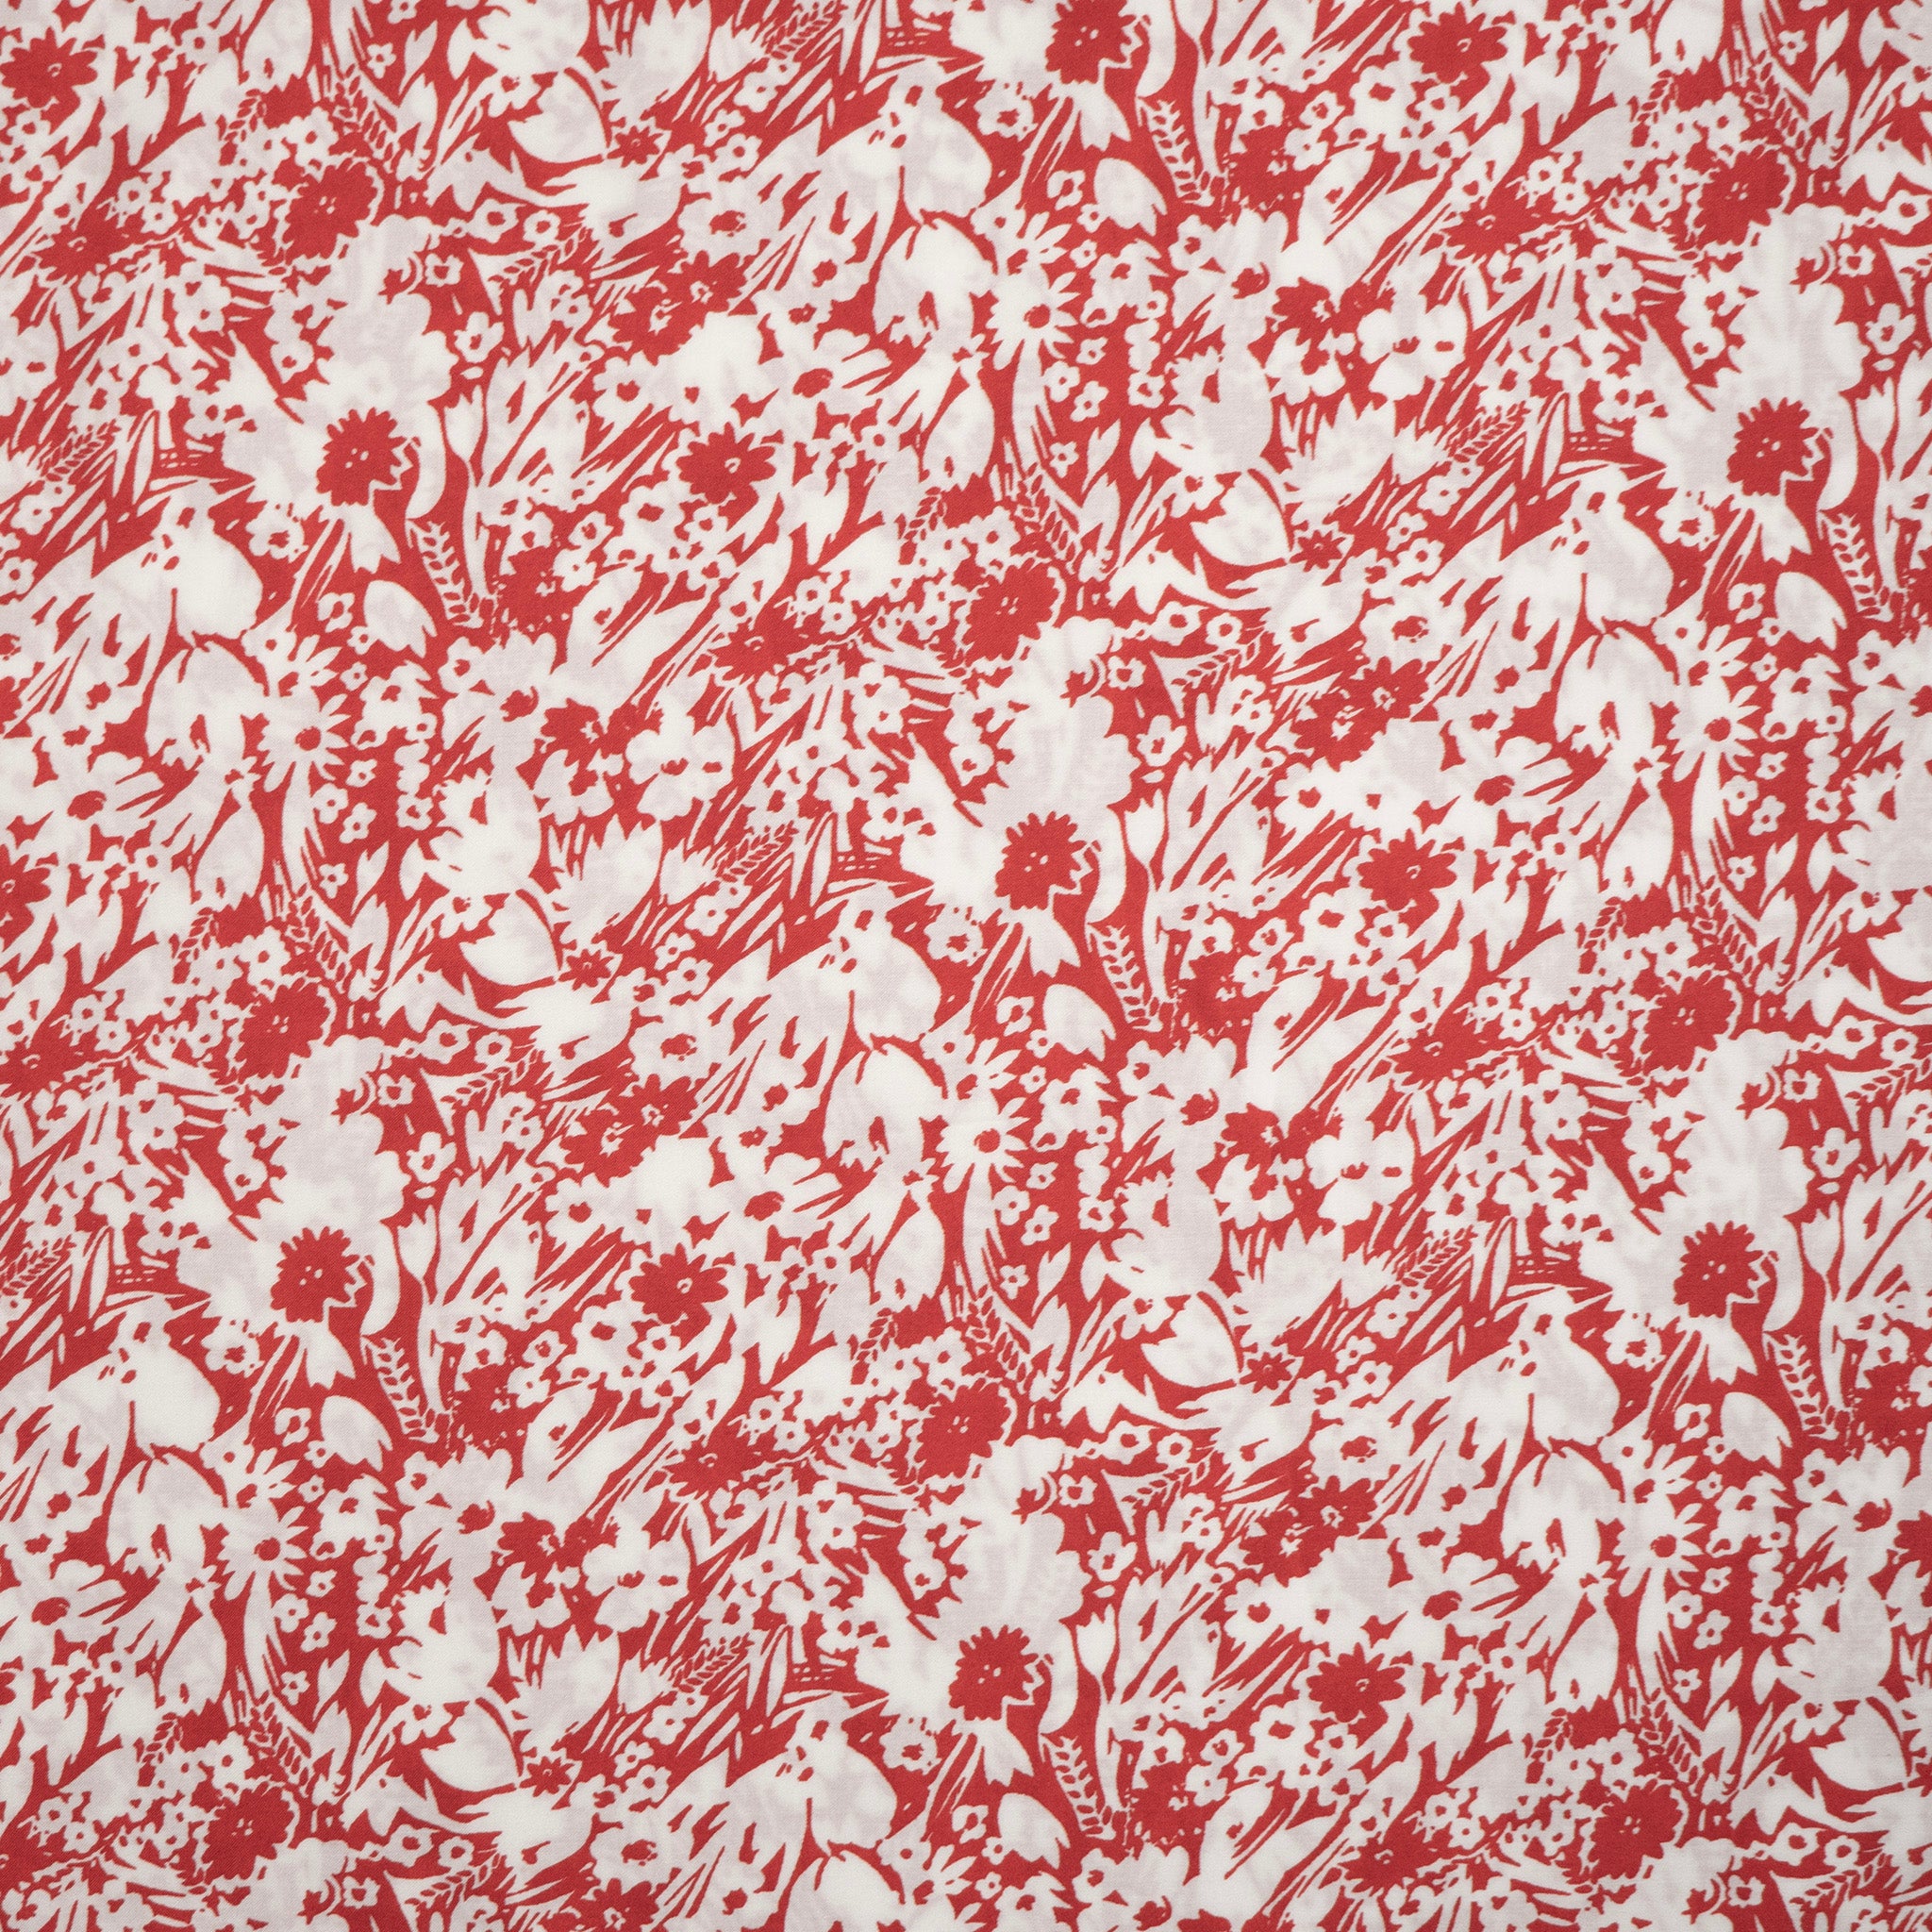 Red Skies Floral Cotton Lawn Fabric